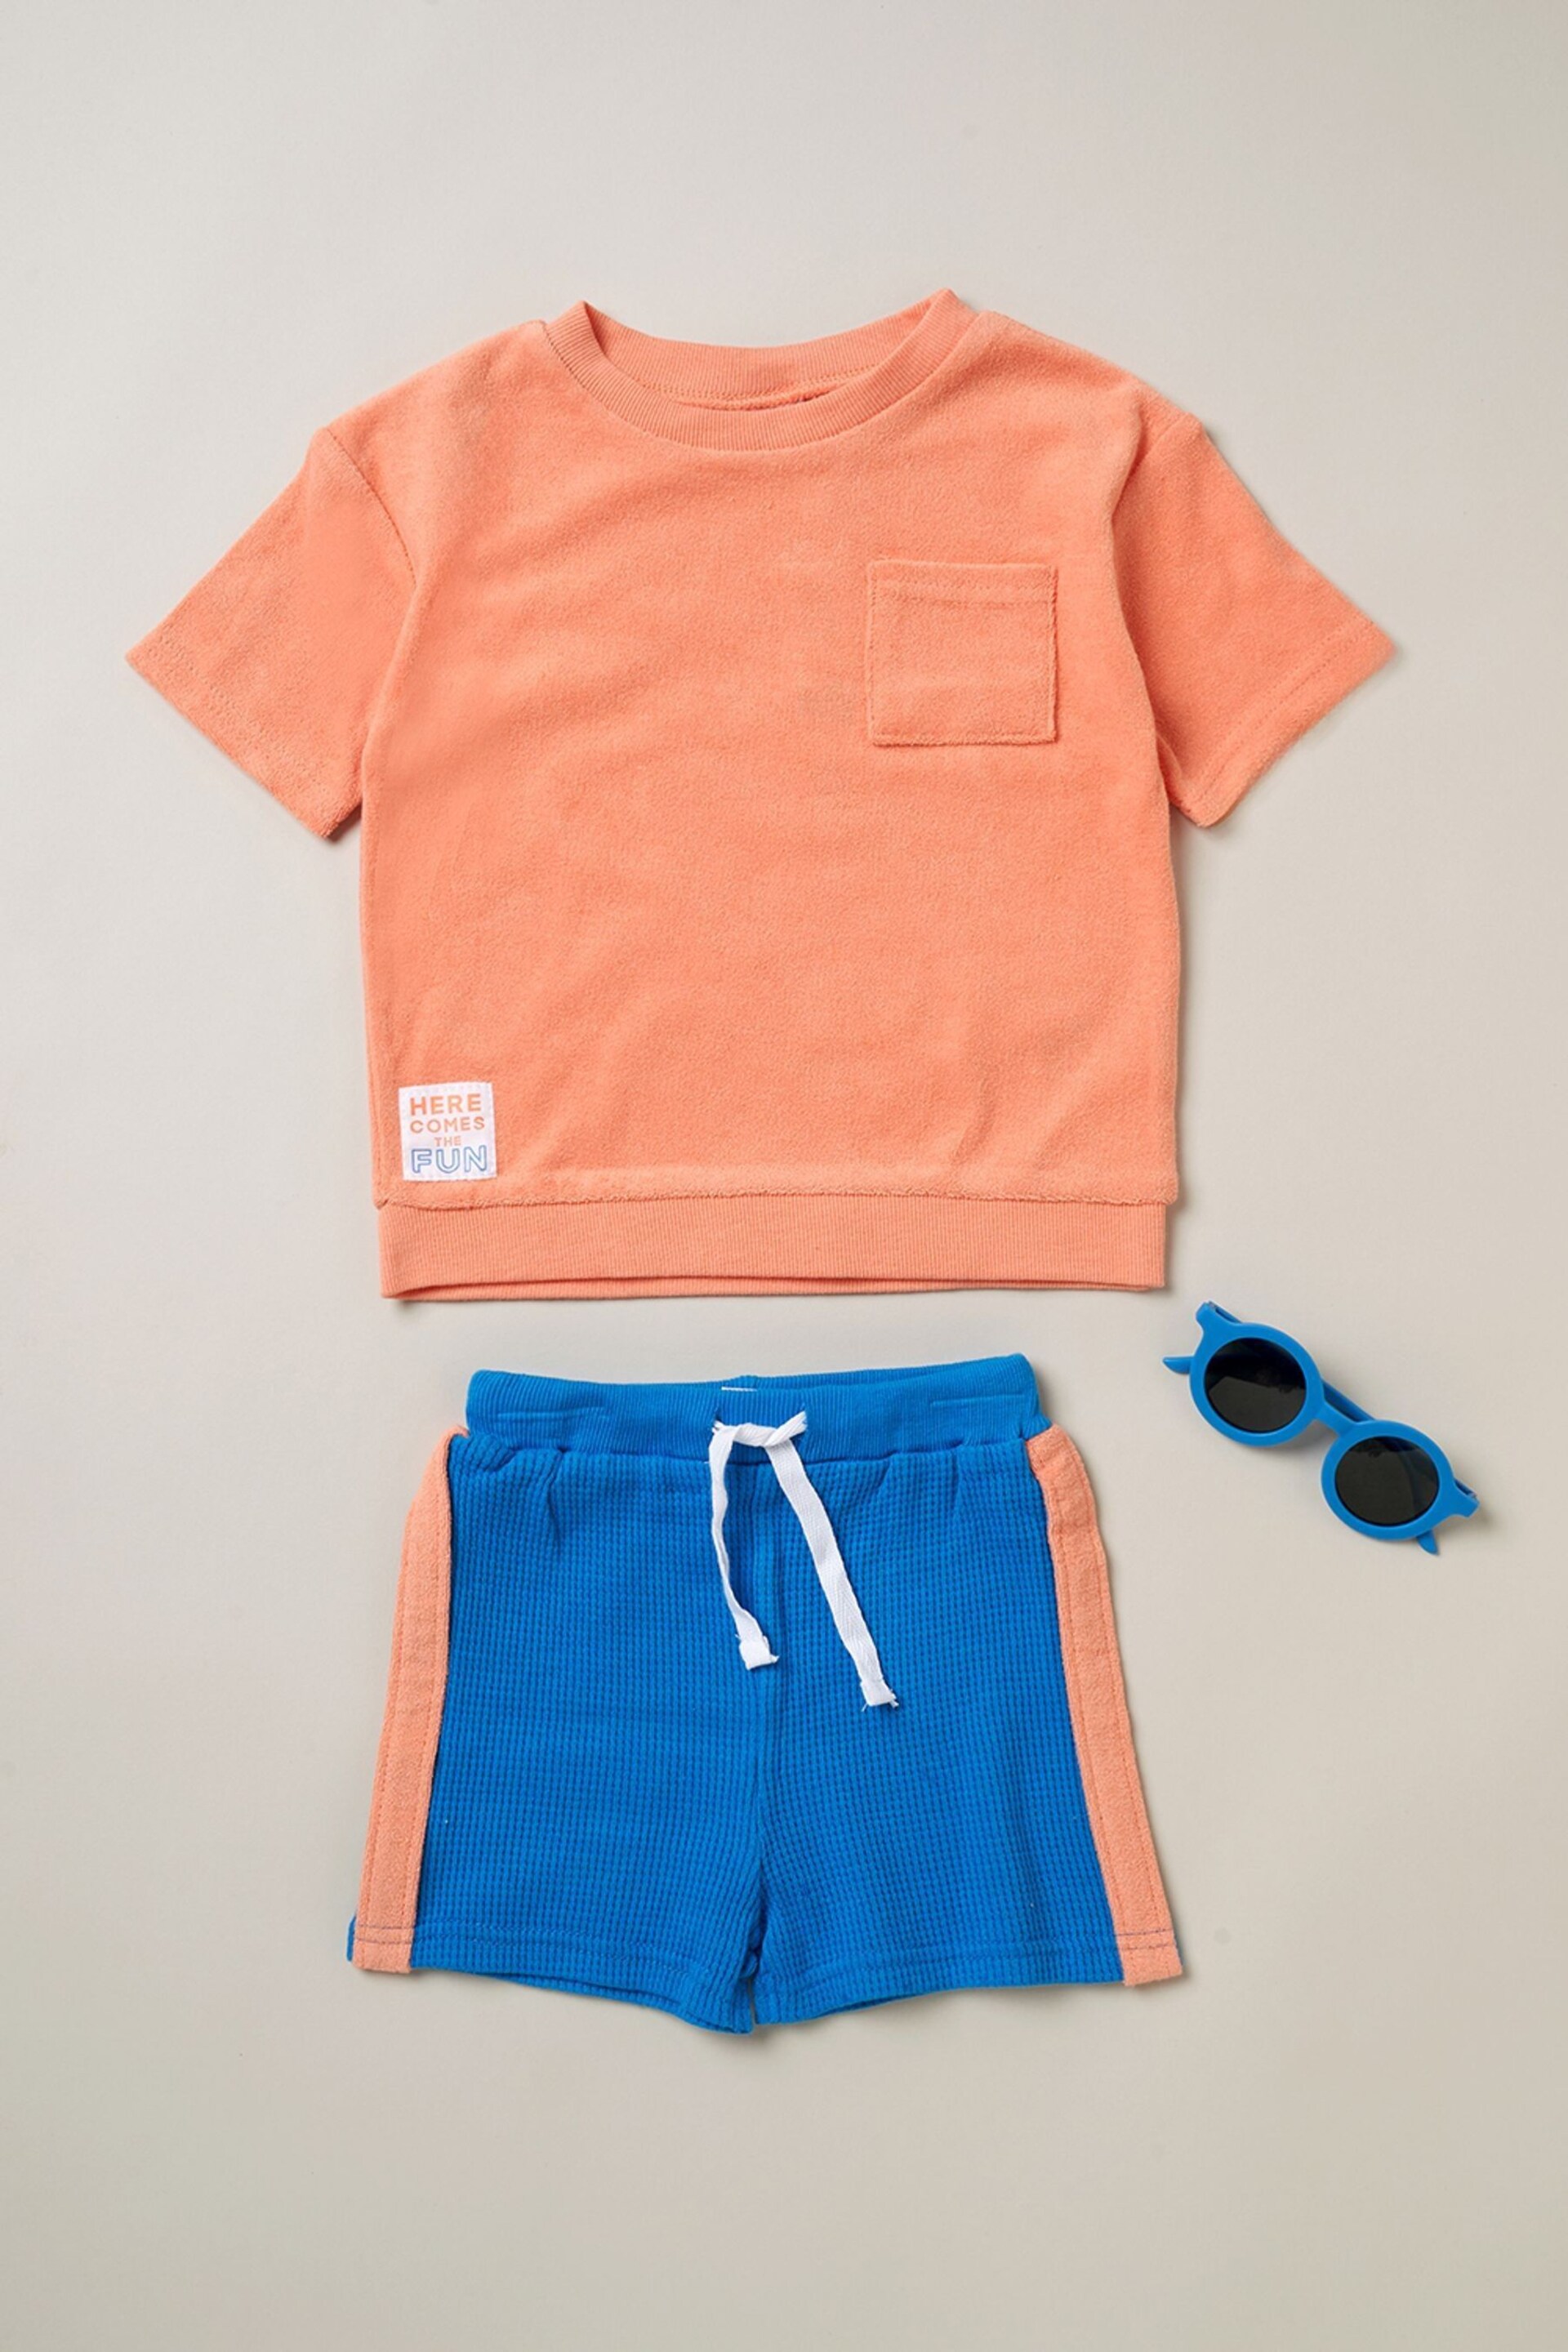 Lily & Jack Blue Top Shorts And Sunglasses Outfit Set 3 Piece - Image 1 of 5